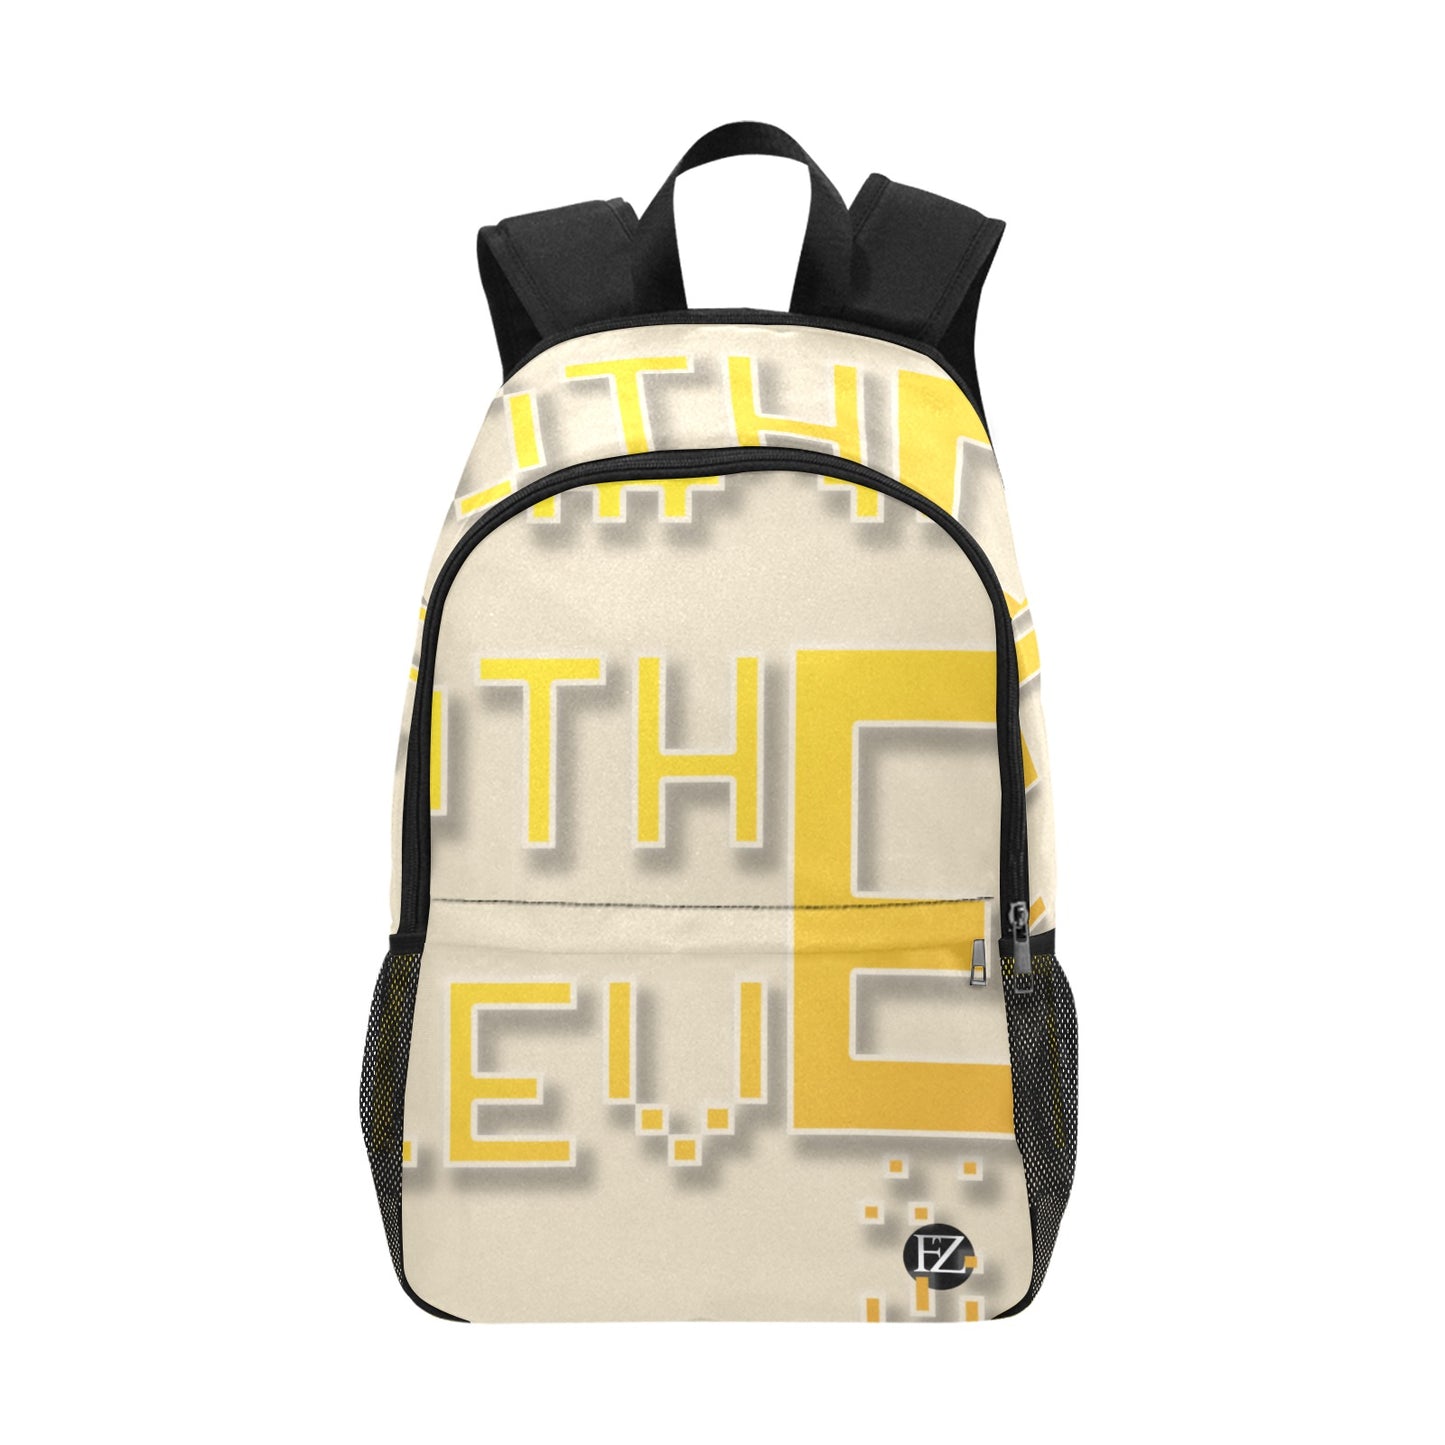 fz yellow levels backpack one size / fz levels backpack - creme all-over print unisex casual backpack with side mesh pockets (model 1659)